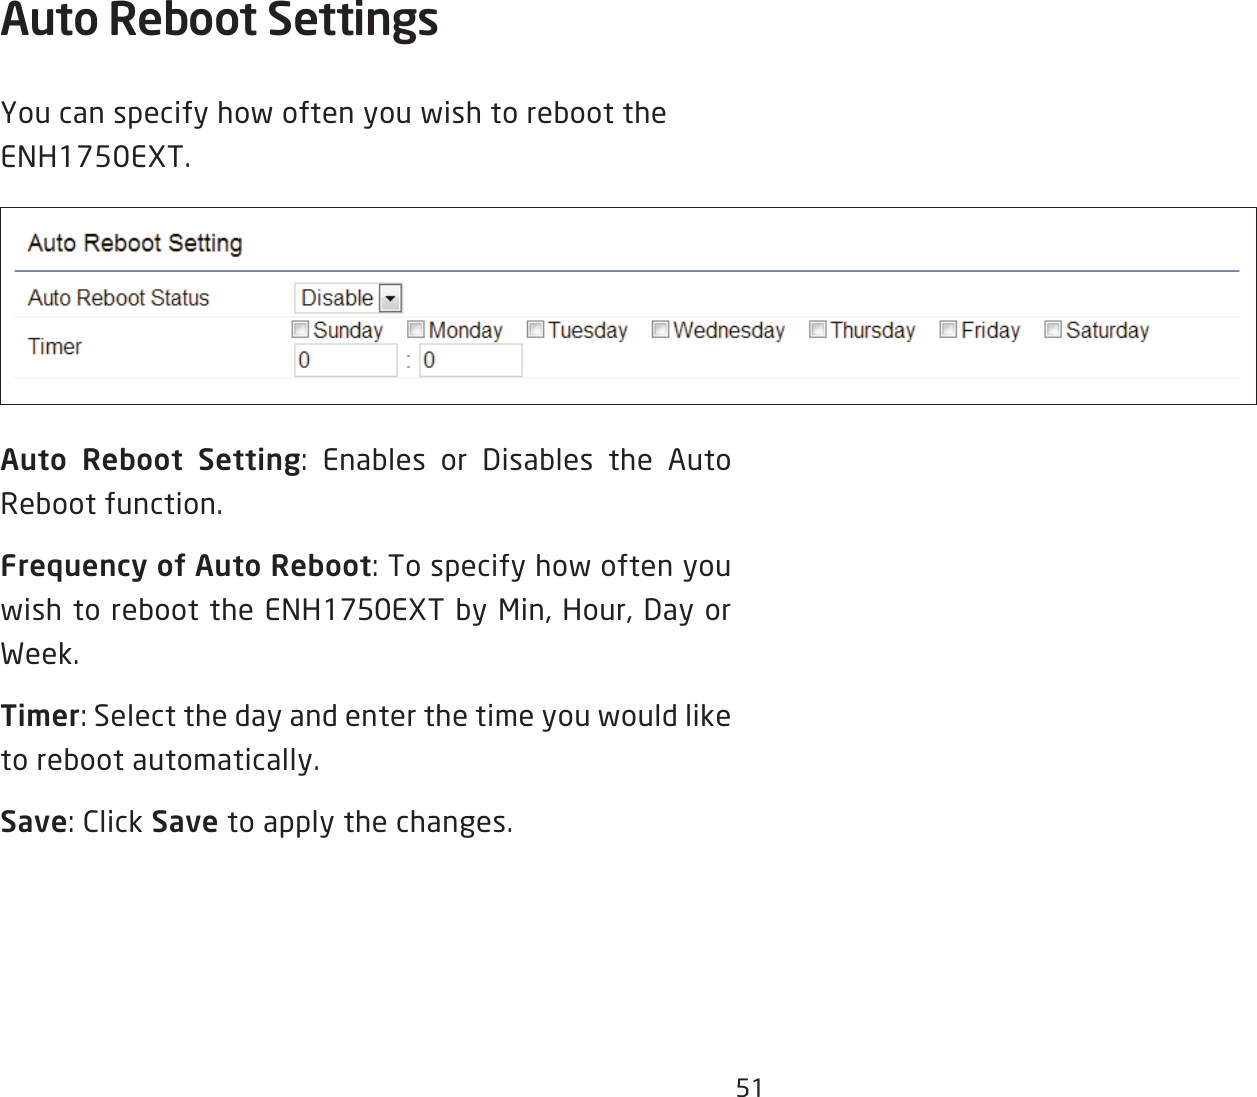 51Auto Reboot Settings You can specify how often you wish to reboot the ENH1750EXT.Auto Reboot Setting: Enables or Disables the Auto Reboot function.Frequency of Auto Reboot: To specify how often you wish to reboot the ENH1750EXT by Min, Hour, Day or Week.Timer: Select the day and enter the time you would like to reboot automatically.Save: Click Save to apply the changes.